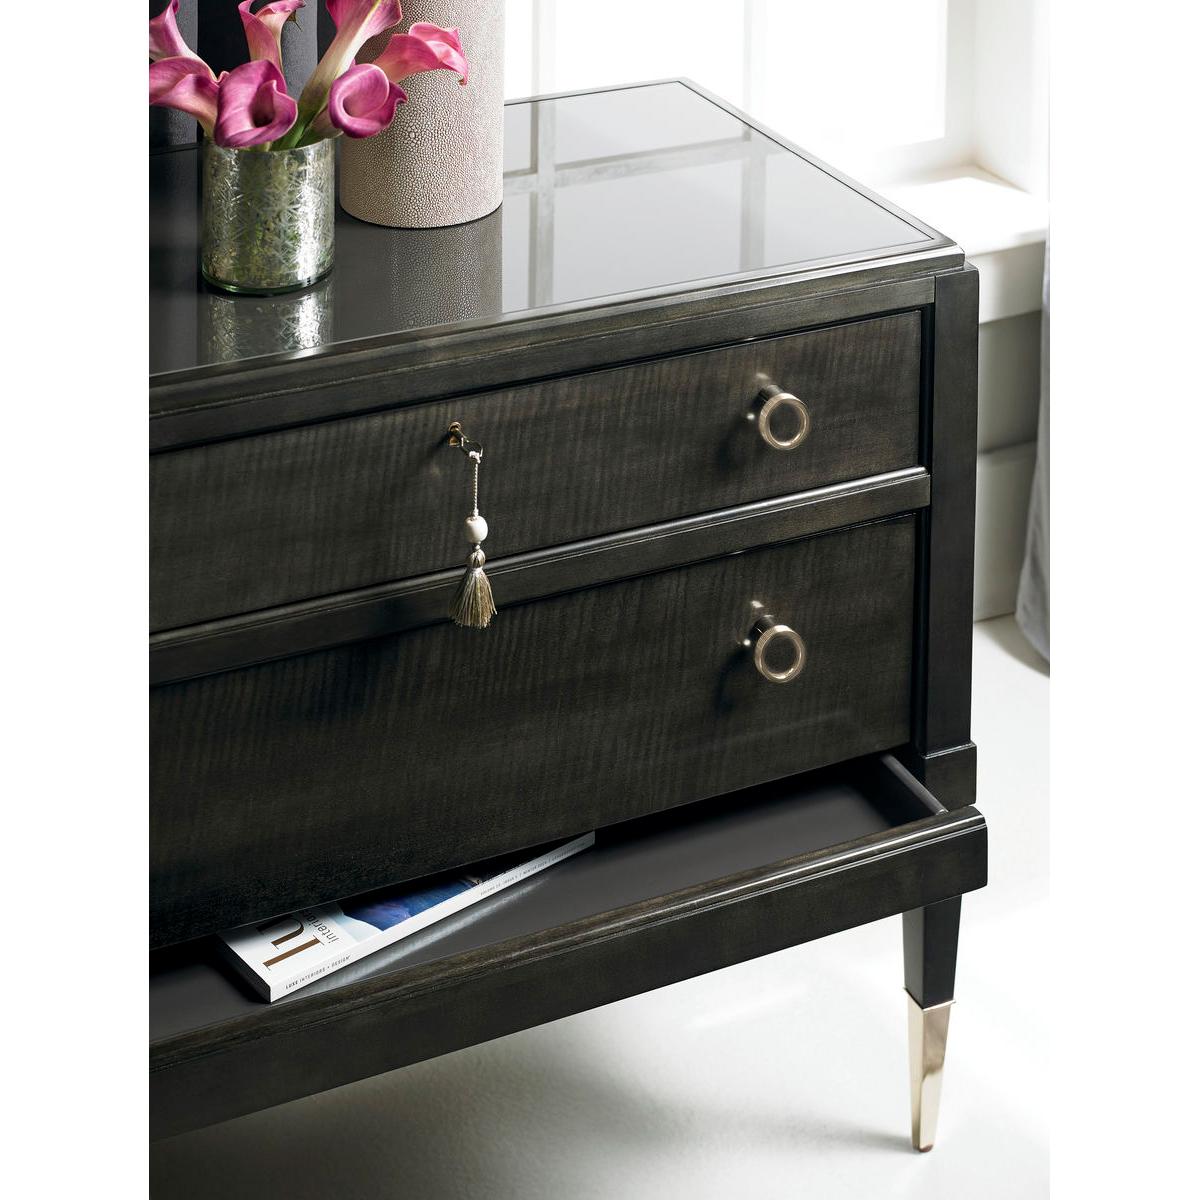 The clean, linear frame of this Charcoal colored nightstand gives off a streamlined air. The piece is punctuated by custom round hardware and tapered legs with gold ferrules. A dark glass top sits over three drawers, one of which is hidden for